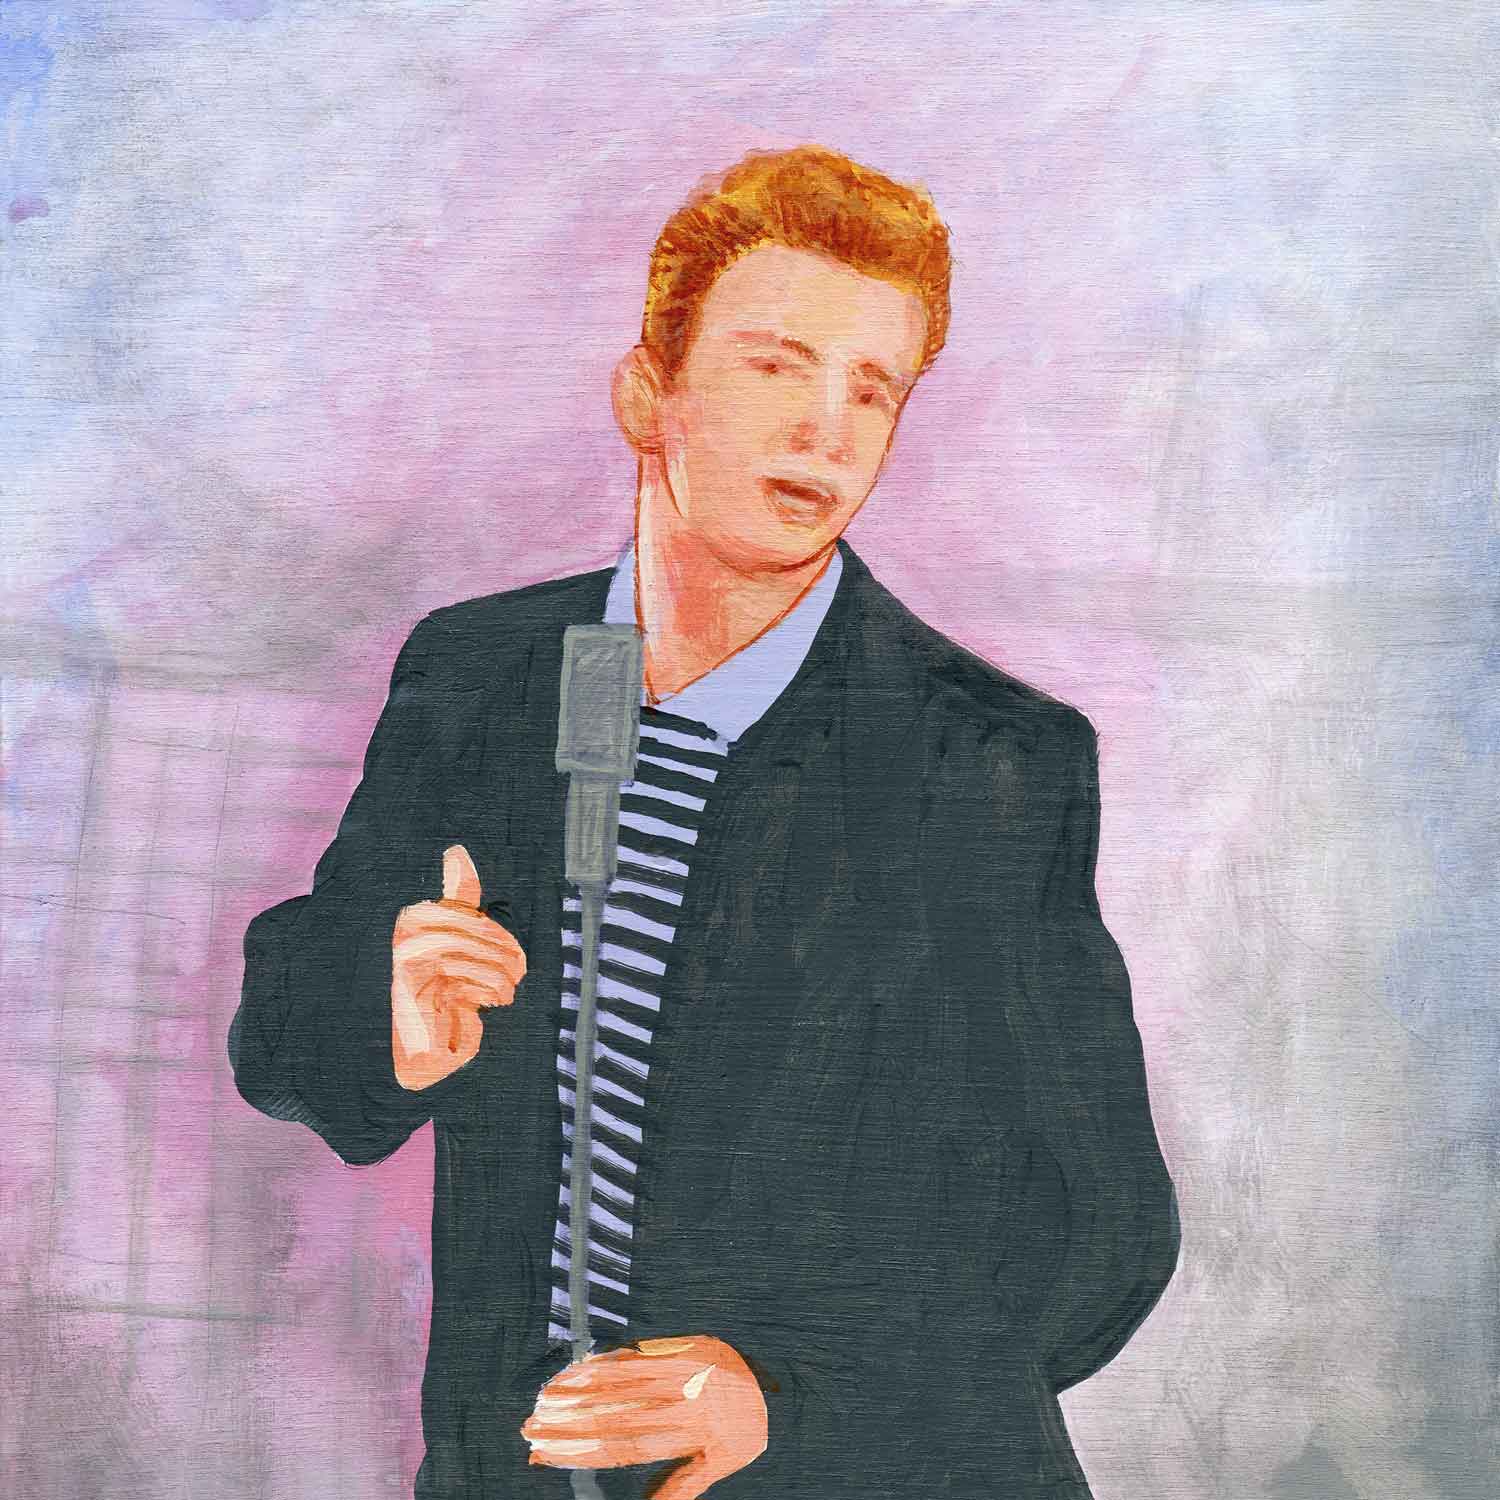 Never gonna give u up